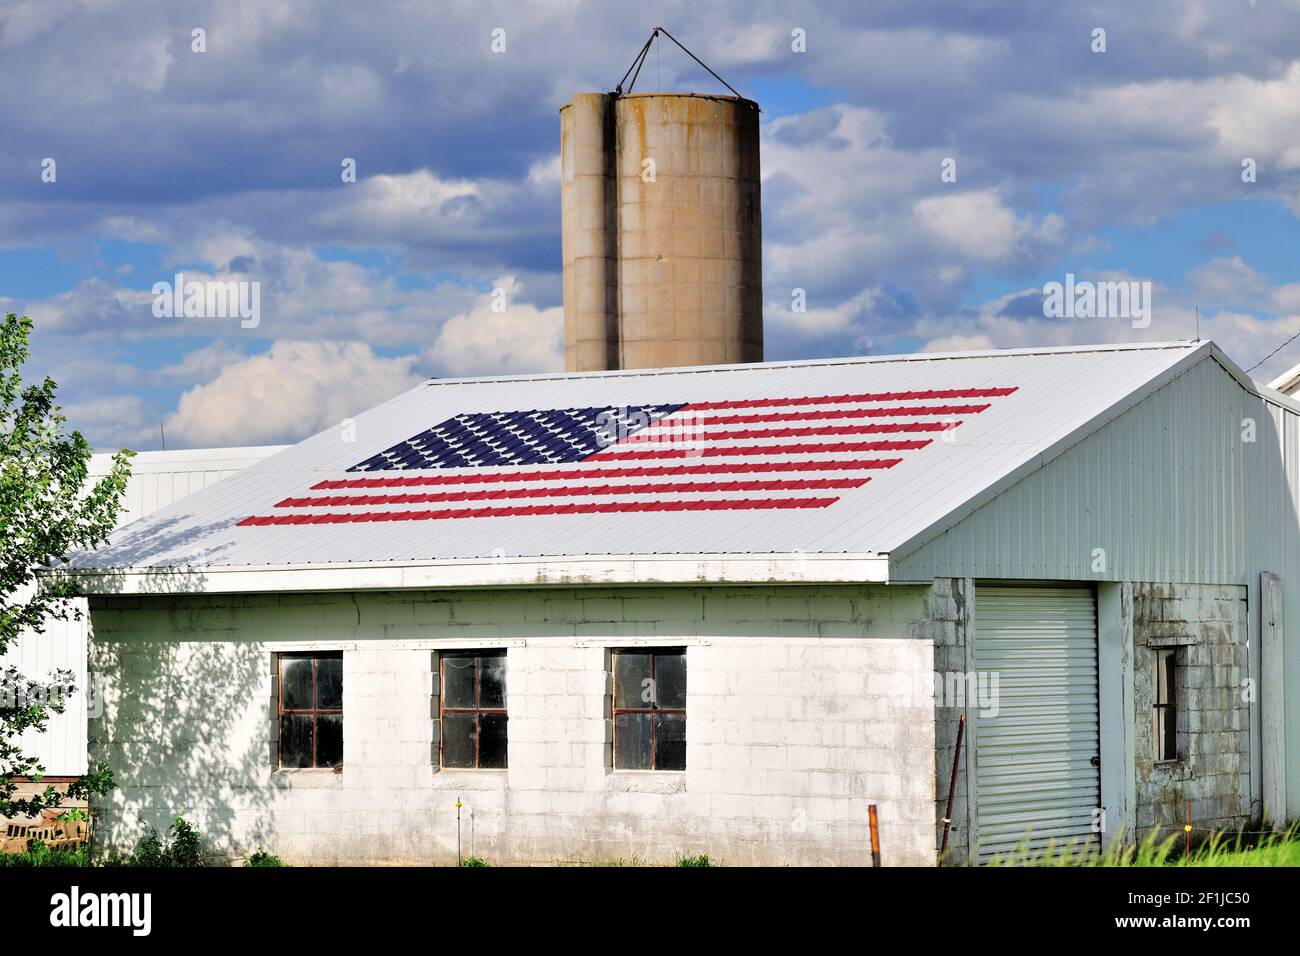 Burlington, Illinois, USA. A patriotic shed on a farm that provides a glimpse at conservative and traditional values common within the Midwestern US. Stock Photo